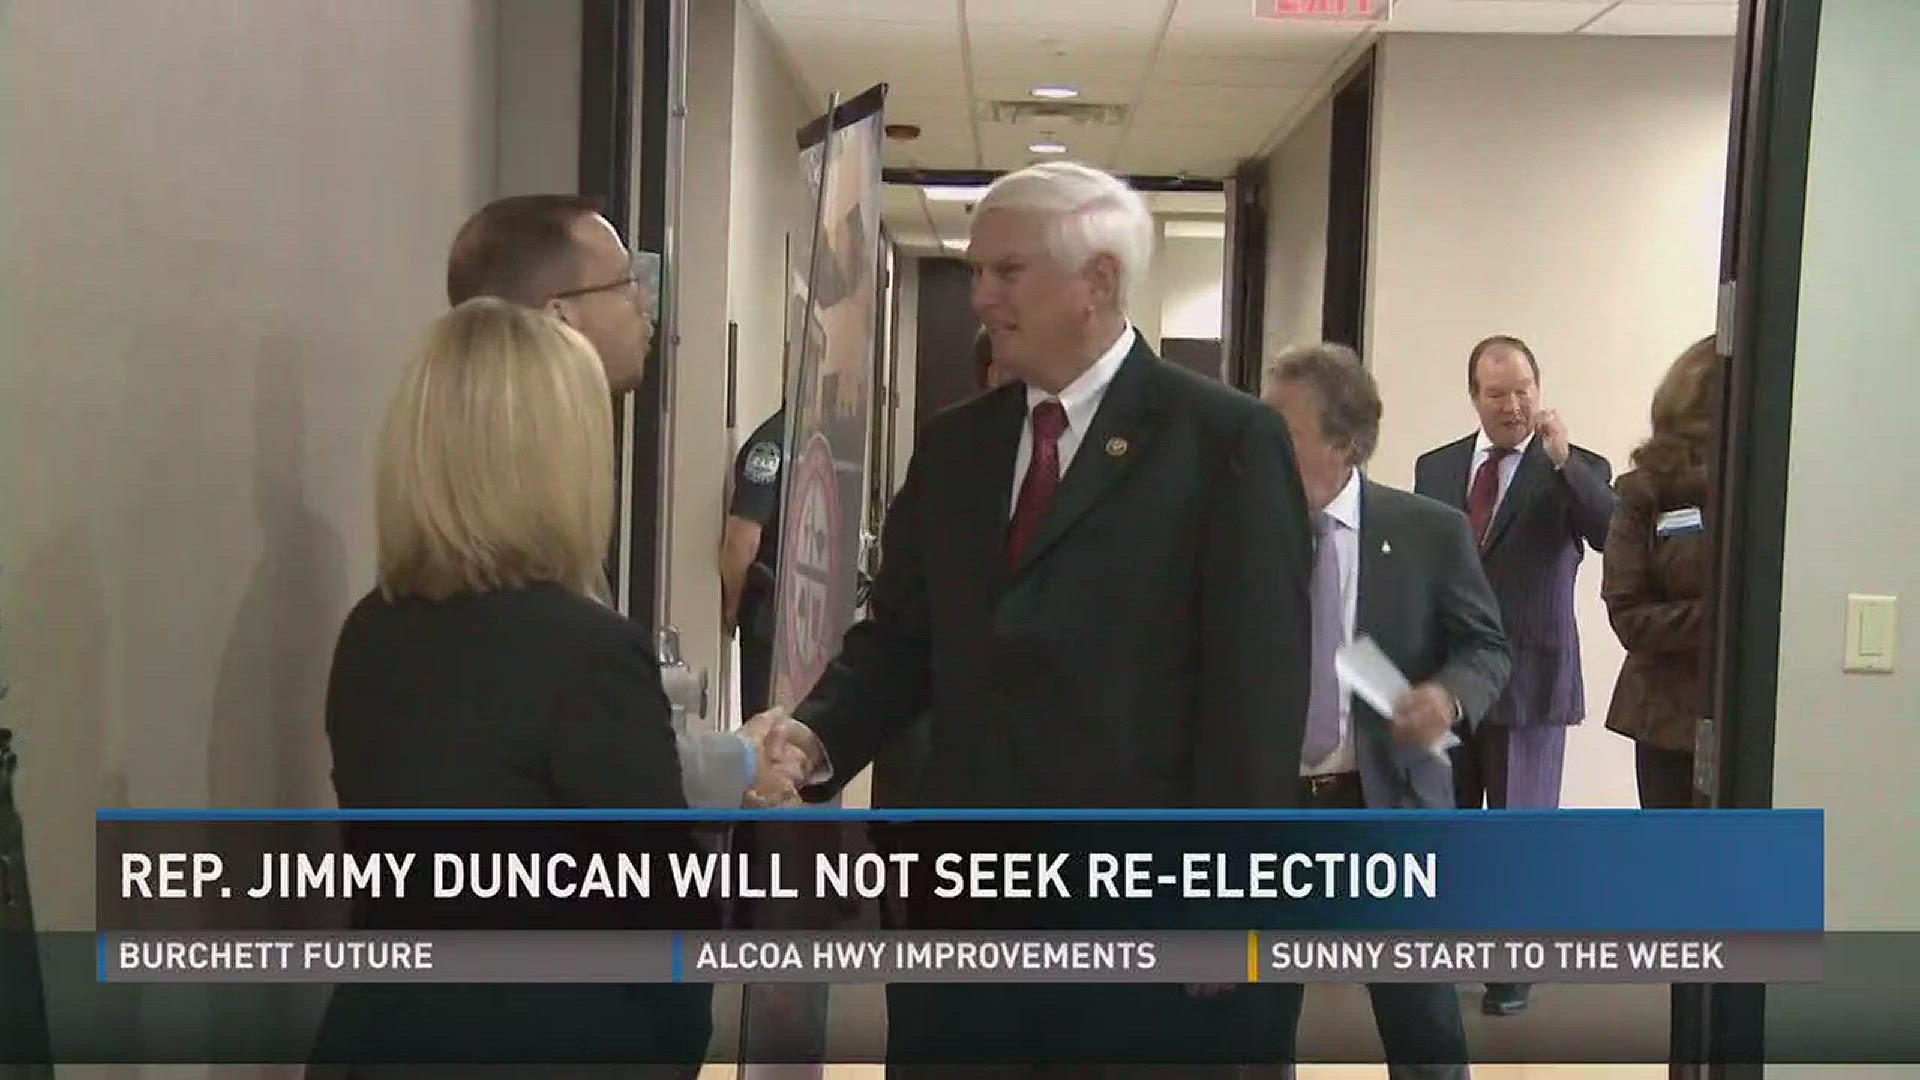 Duncan, a Republican, has held the 2nd congressional district seat since 1988.